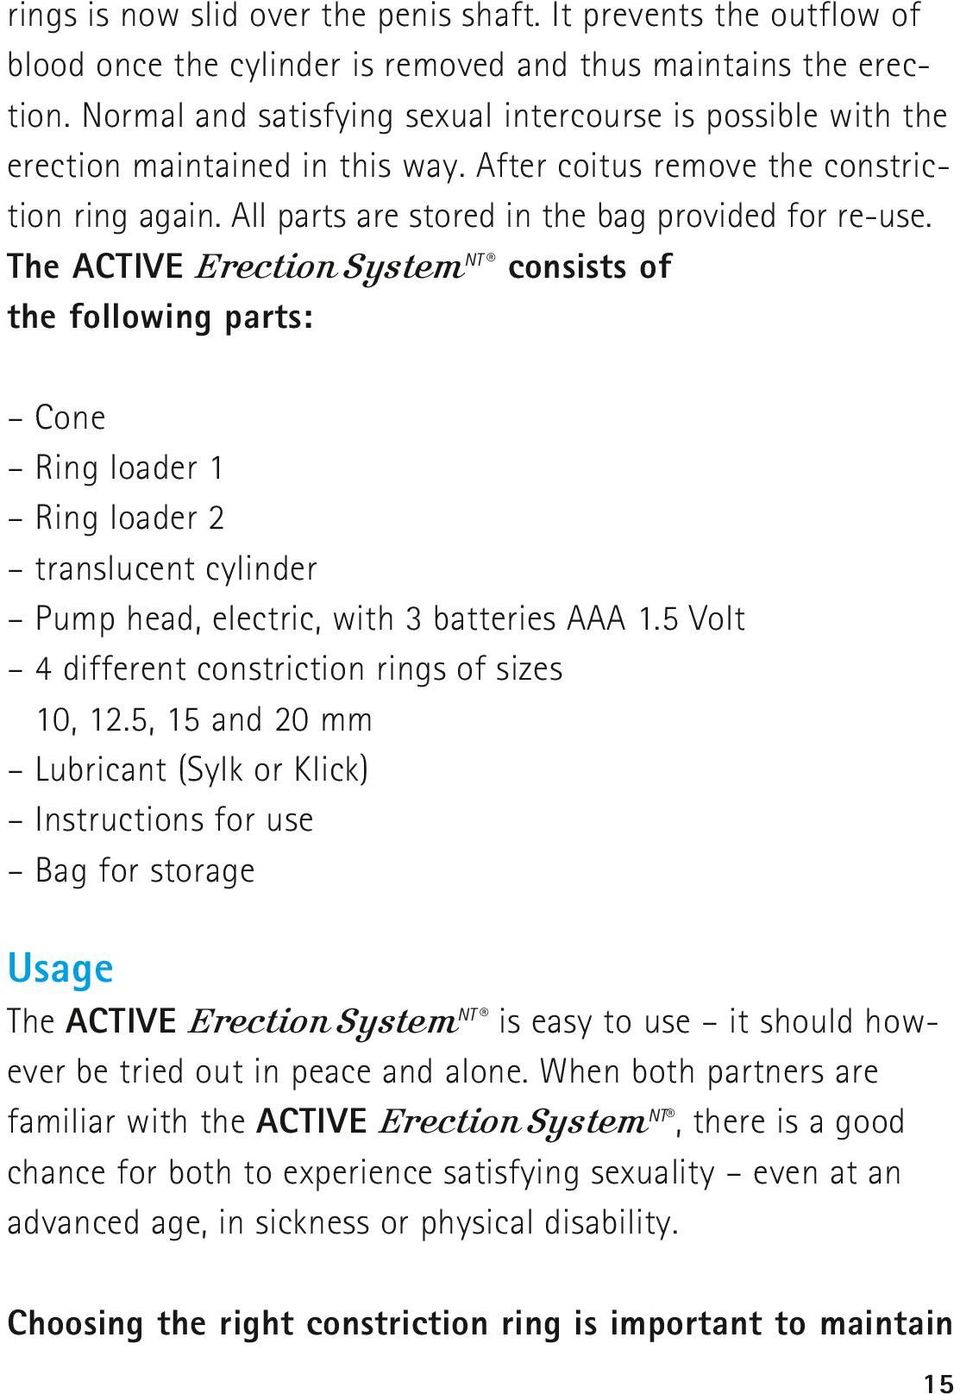 The ACTIVE Erection SystemNT consists of the following parts: Cone Ring loader 1 Ring loader 2 translucent cylinder Pump head, electric, with 3 batteries AAA 1.